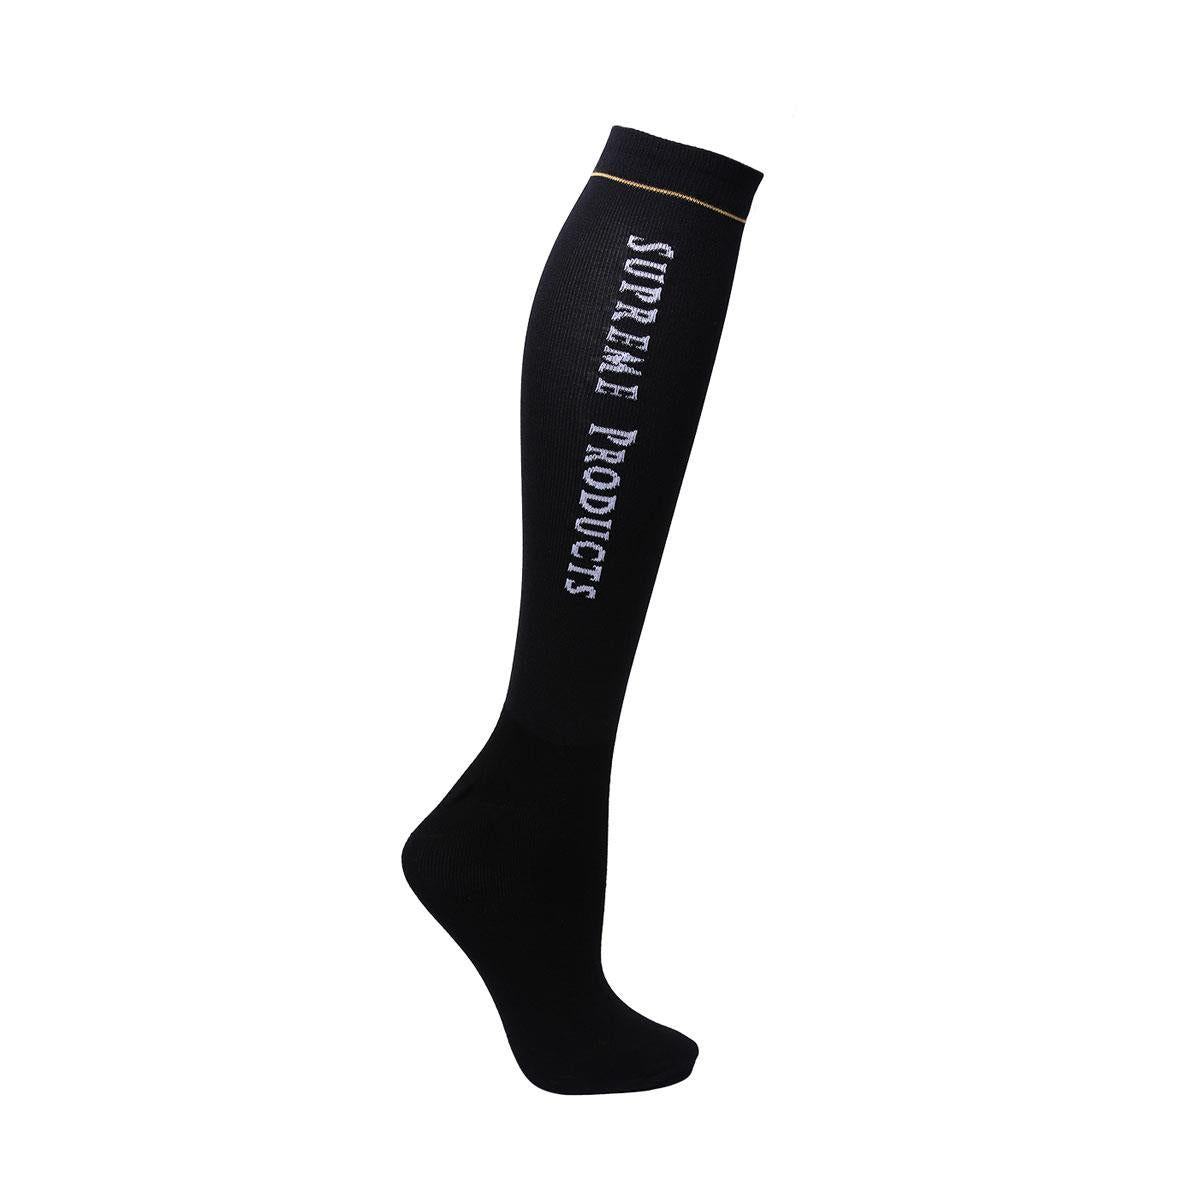 Supreme Products Thin Show Horse Riding Socks - Just Horse Riders